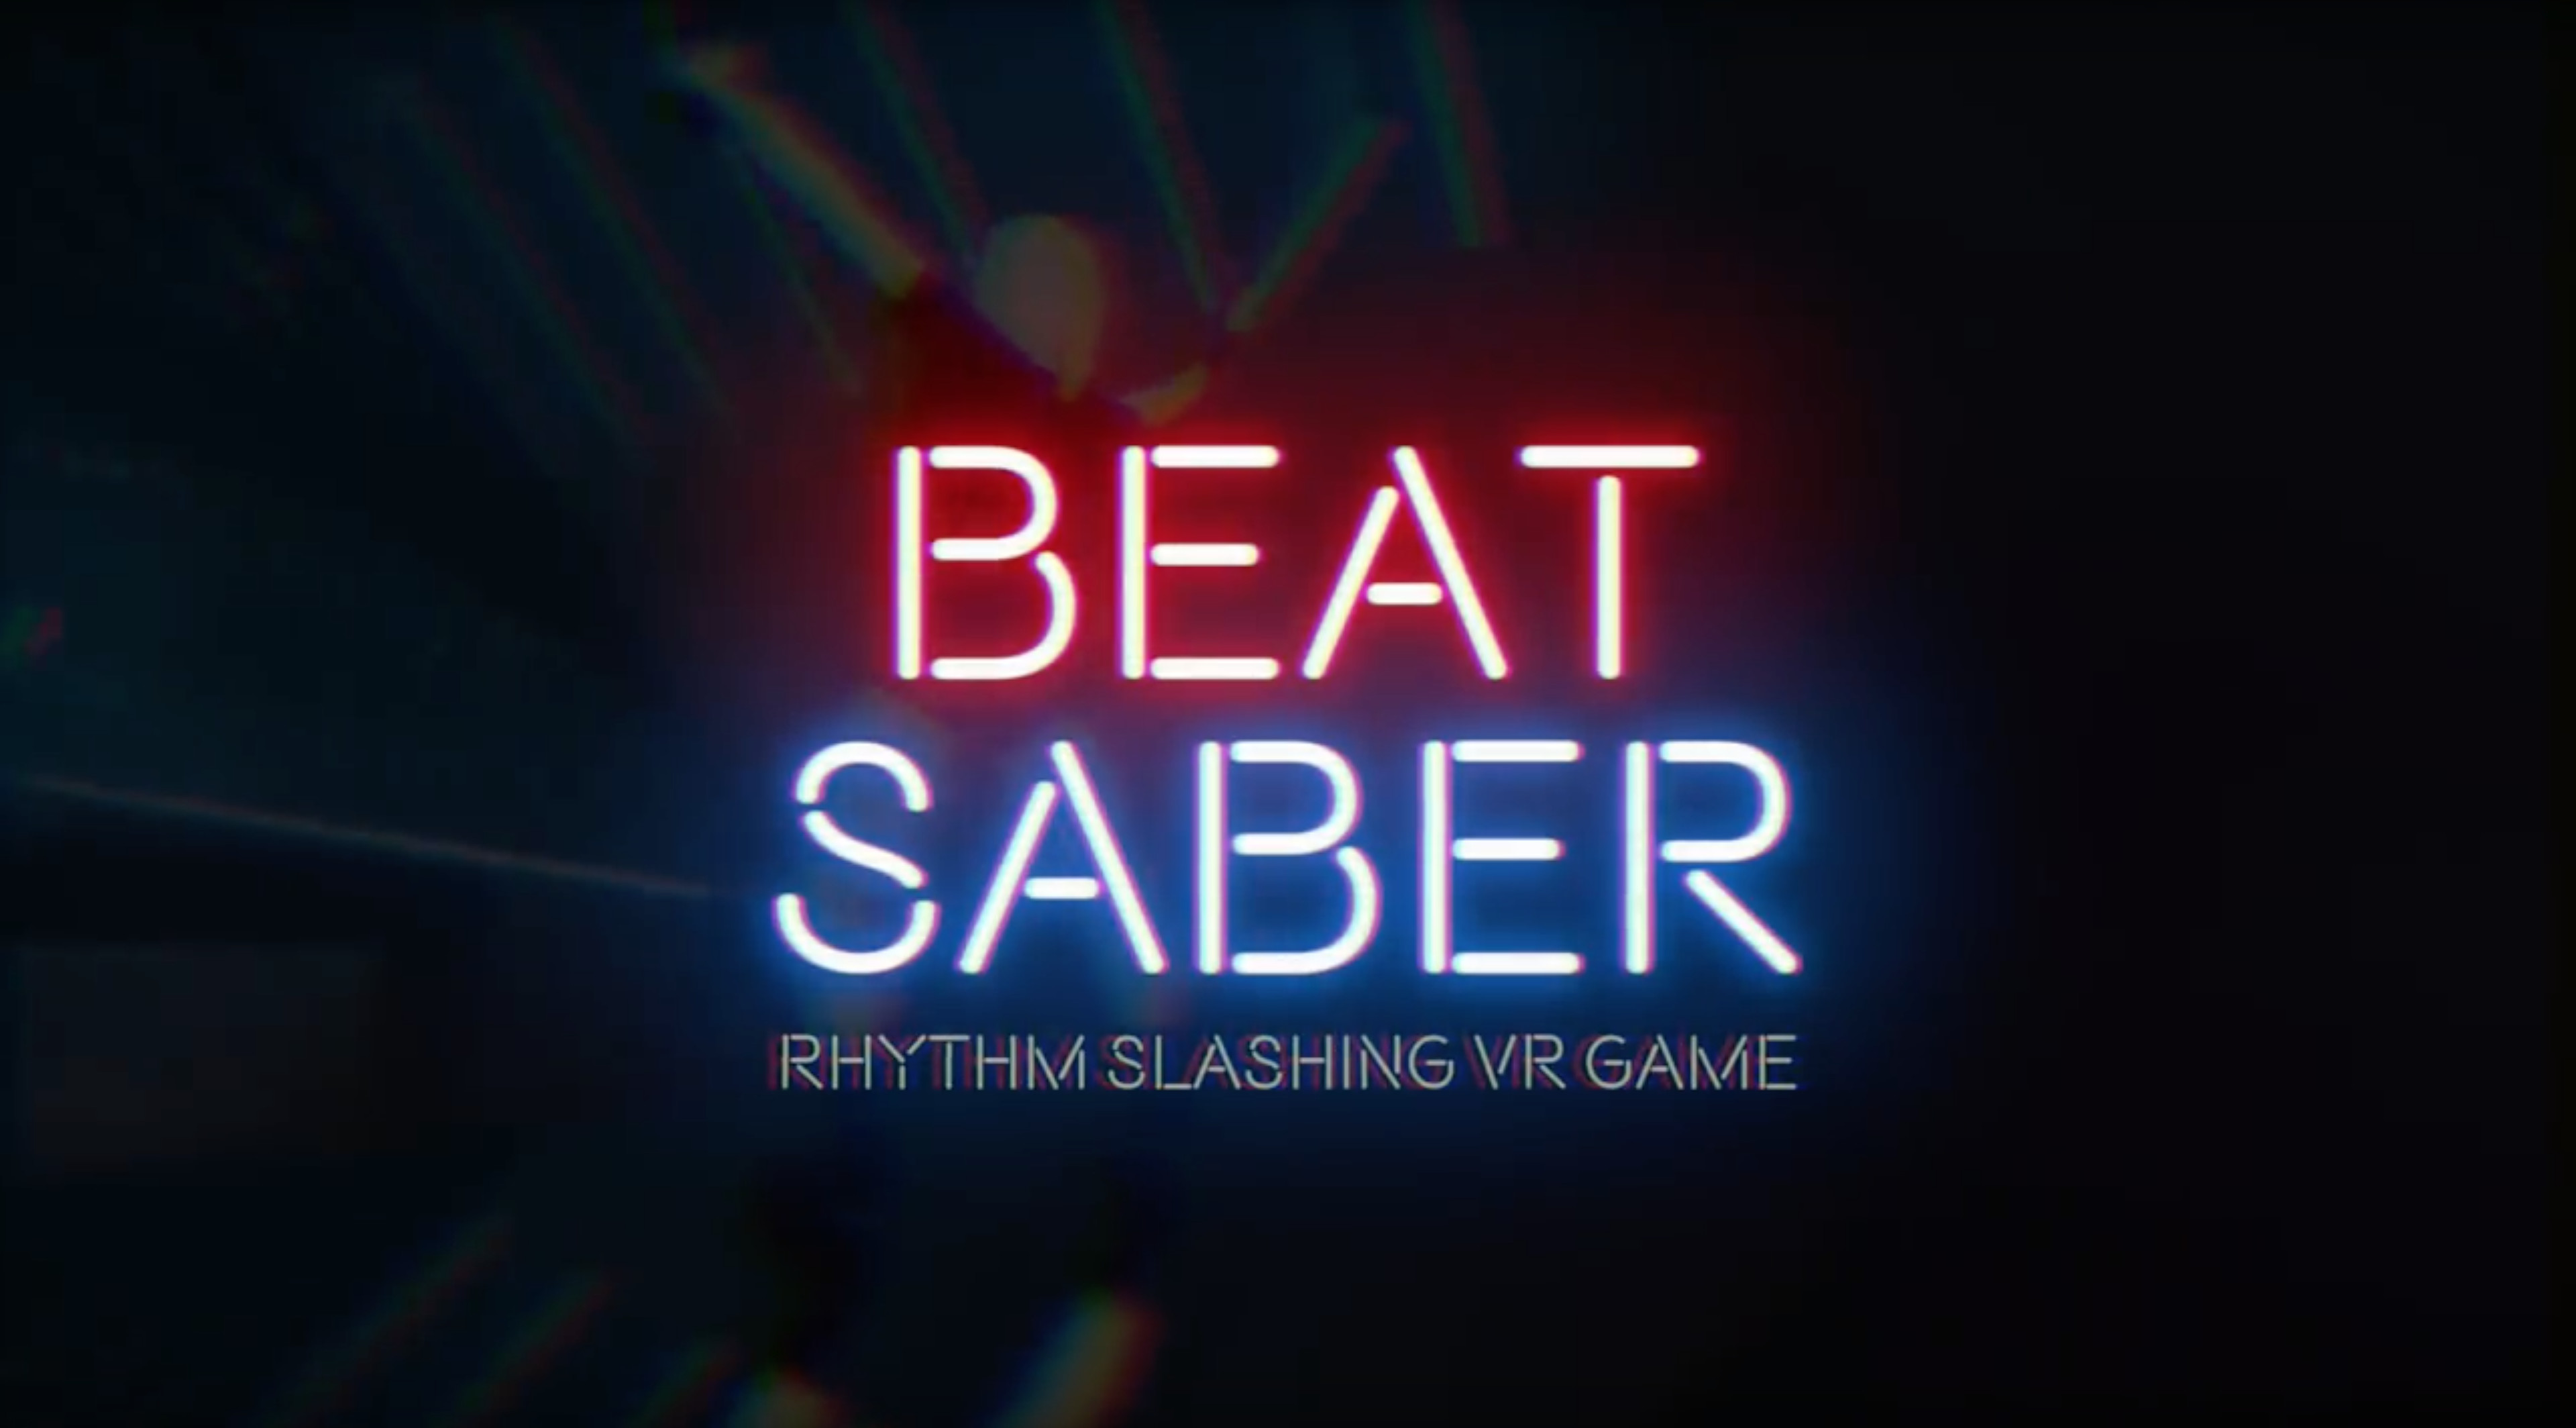 3840x2128 Beat Saber Is What Star Wars Fans' Dreams Look Like